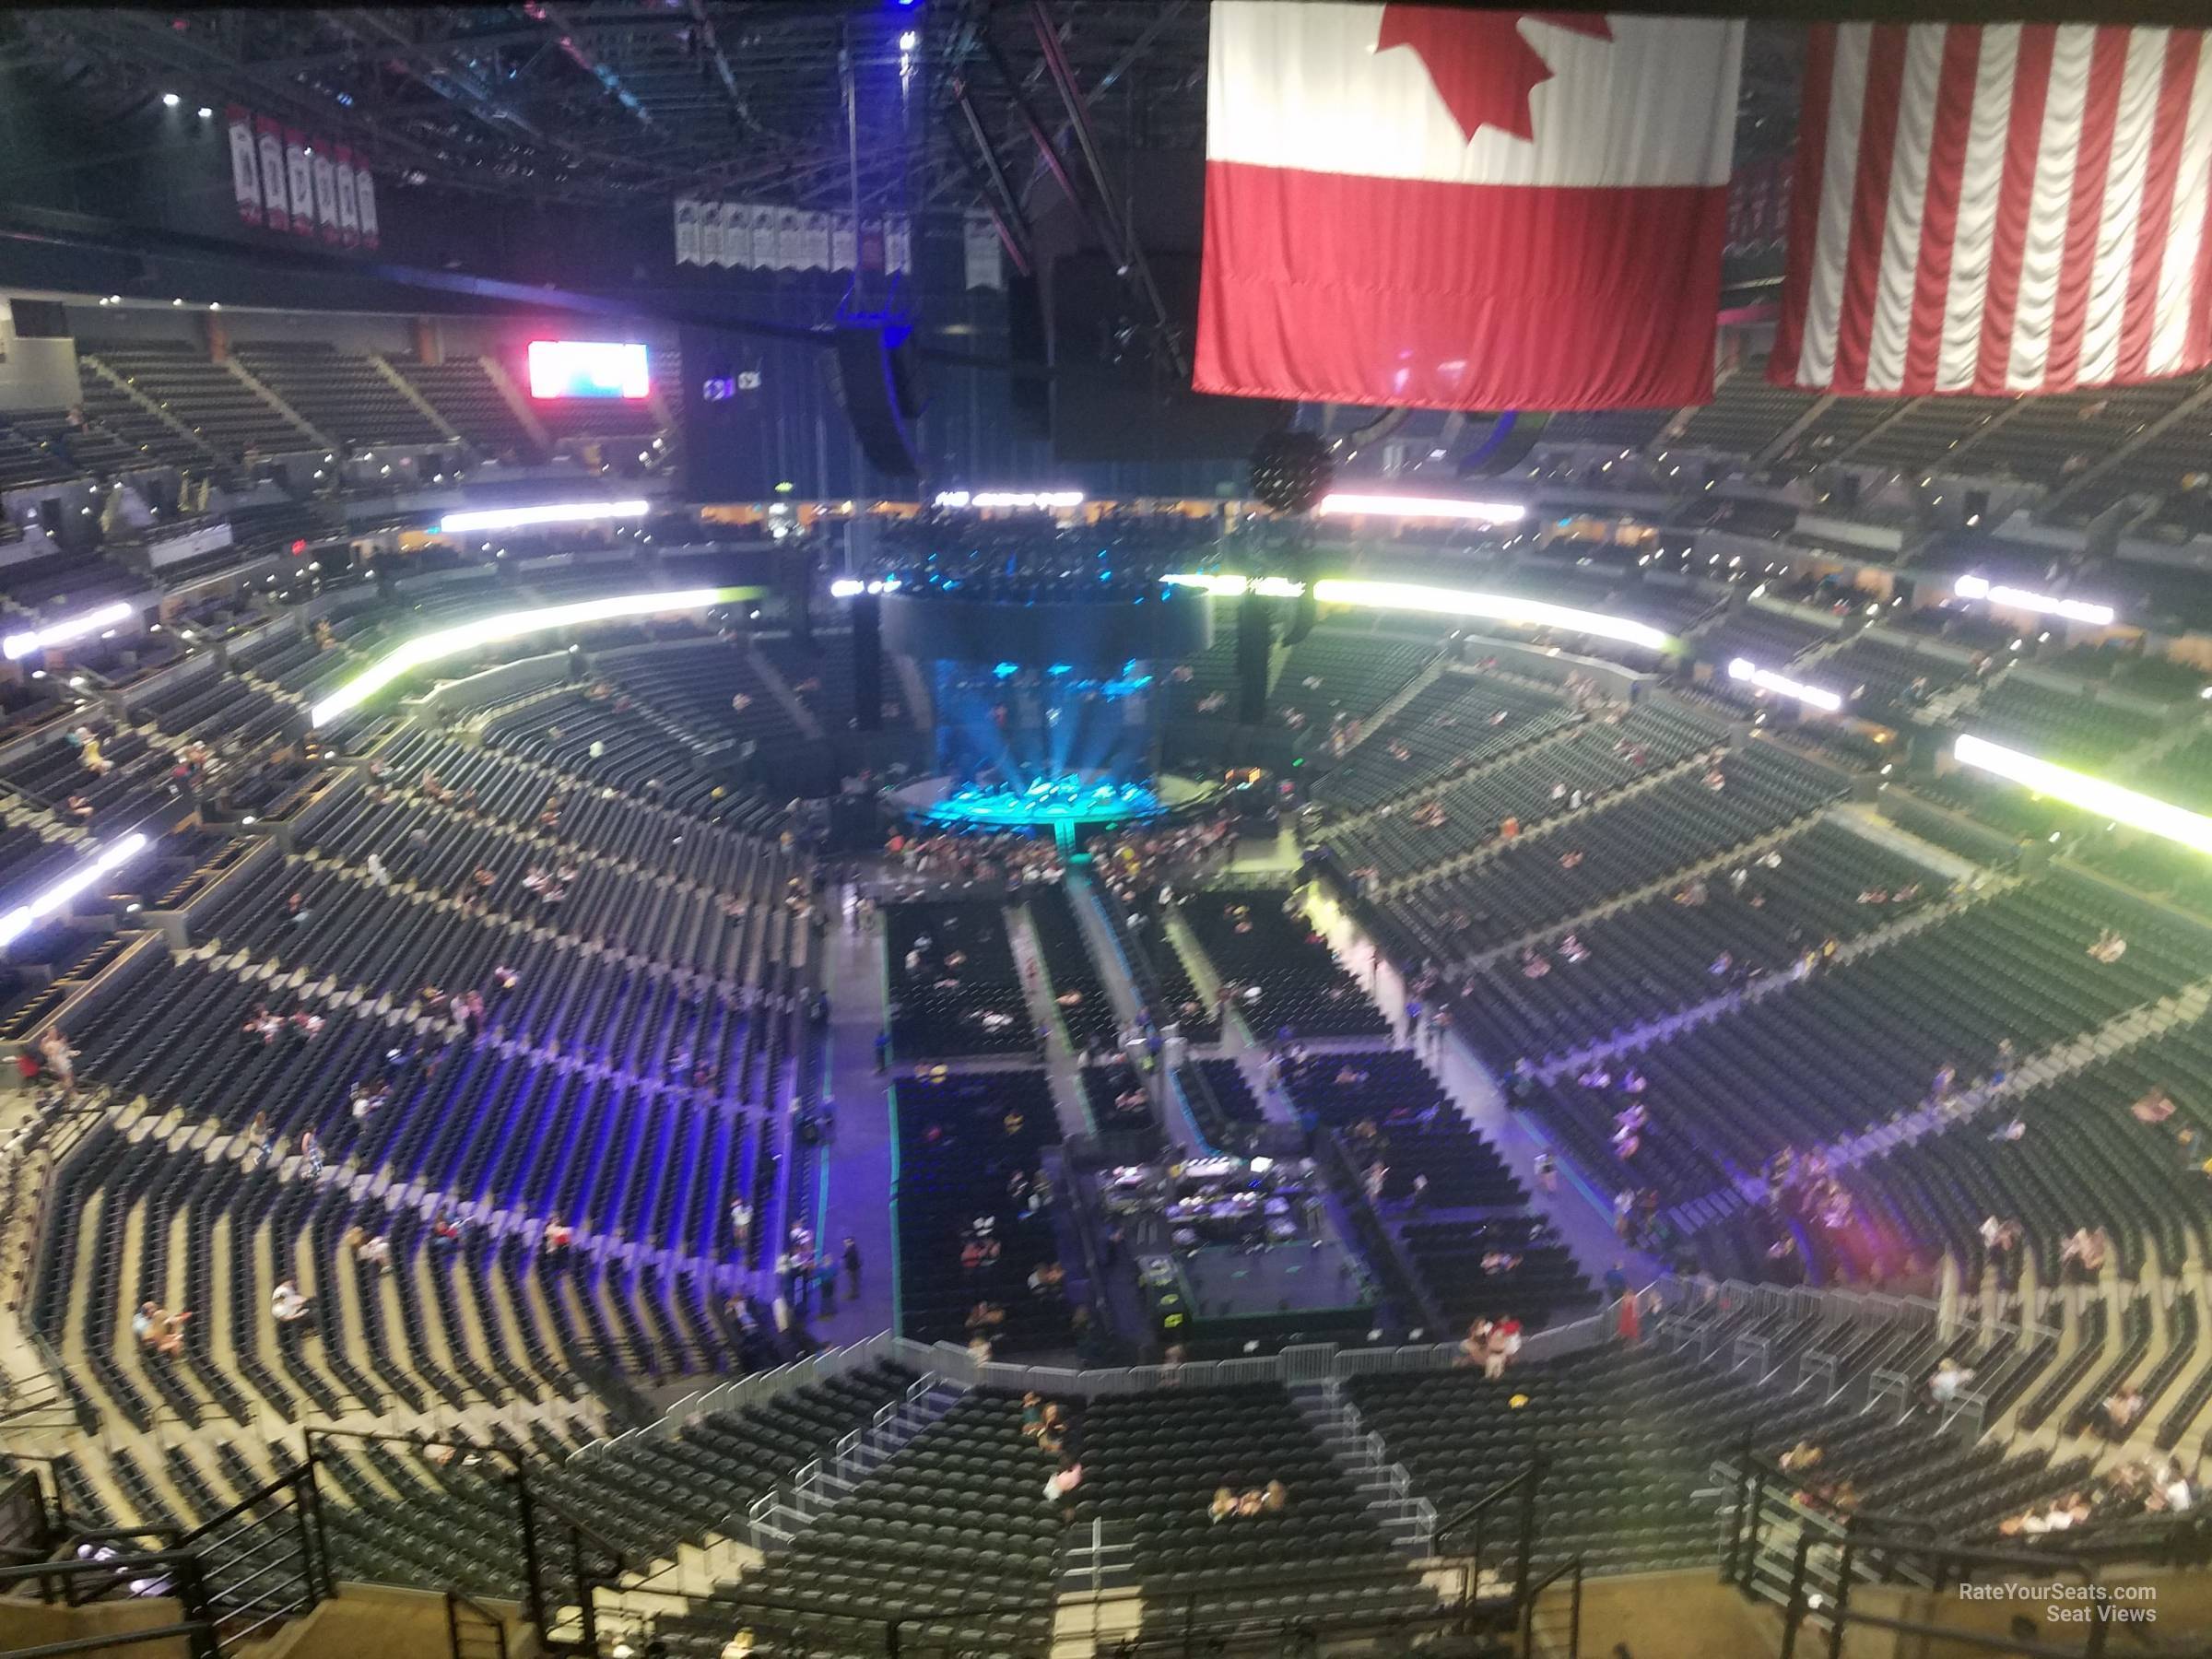 section 324, row 13 seat view  for concert - ball arena